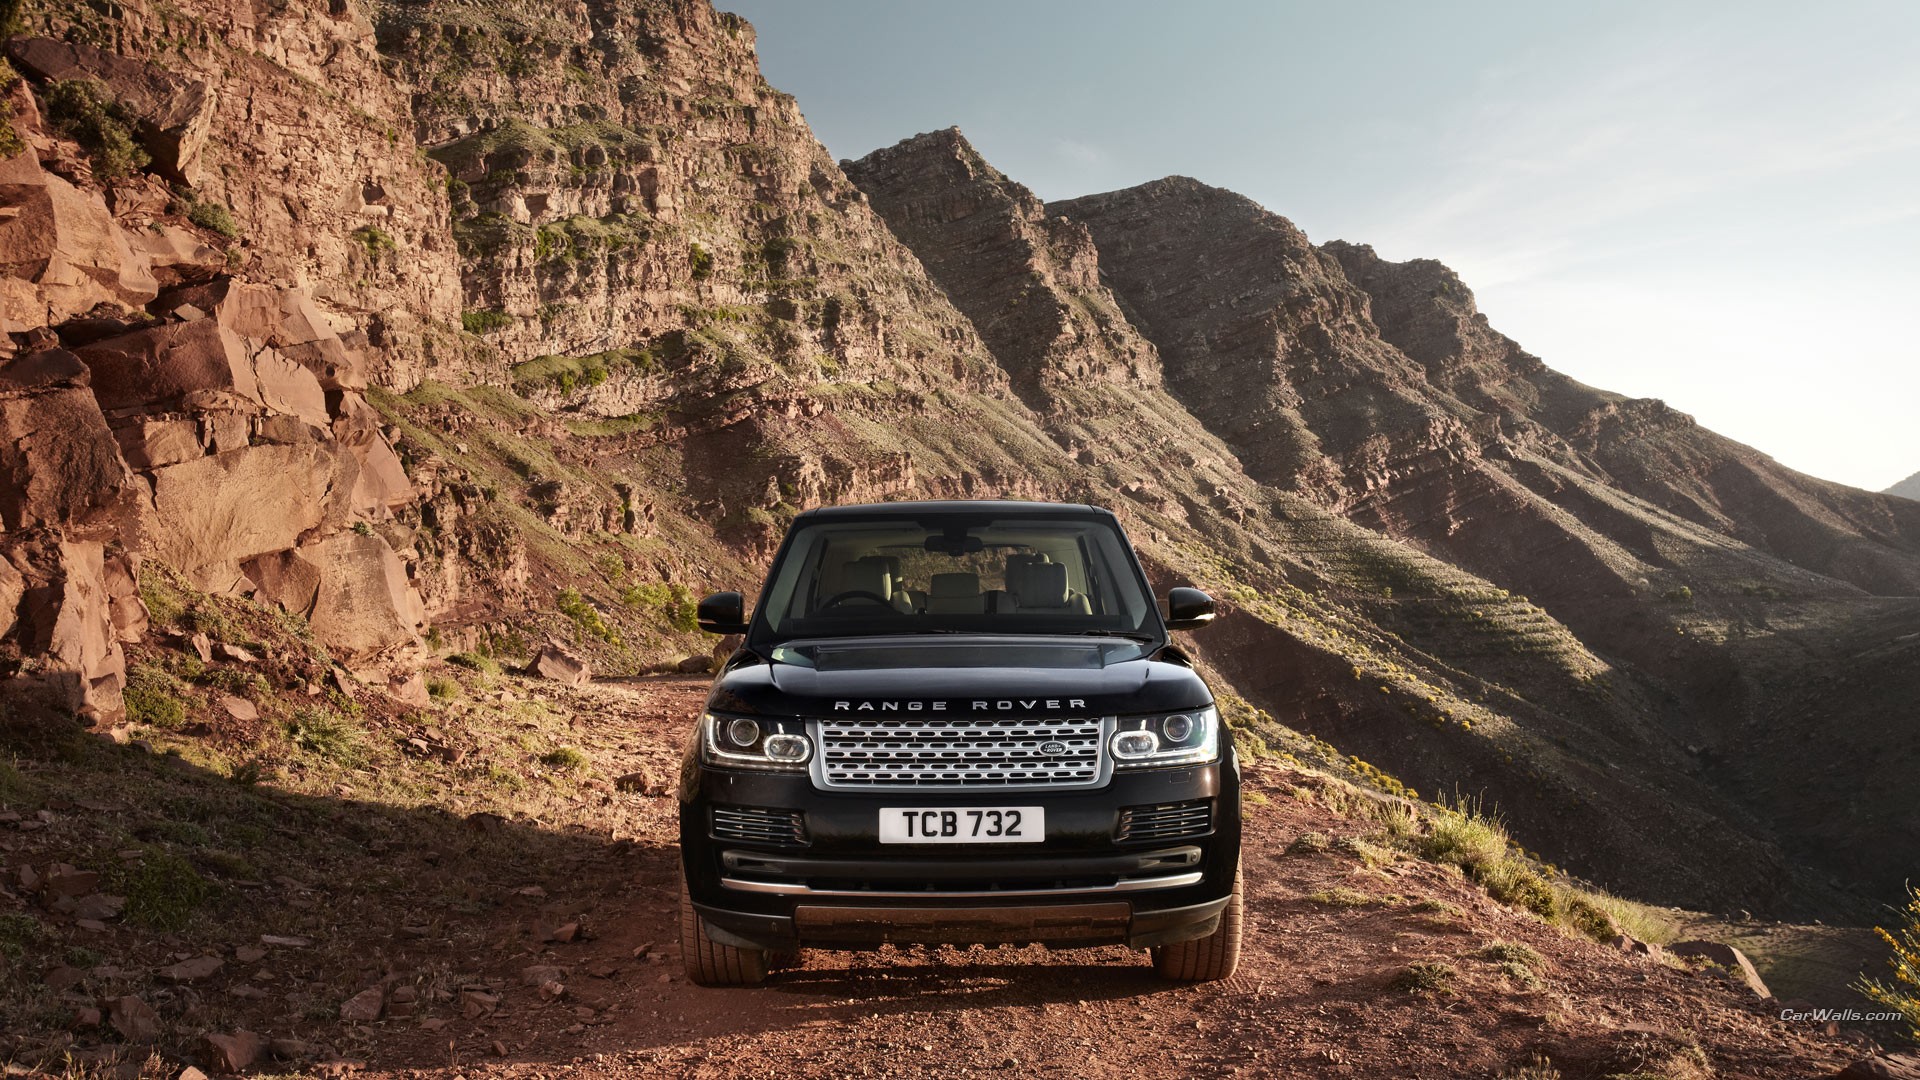 General 1920x1080 Range Rover mountains black cars car vehicle outdoors rocks Land Rover watermarked frontal view British cars SUV